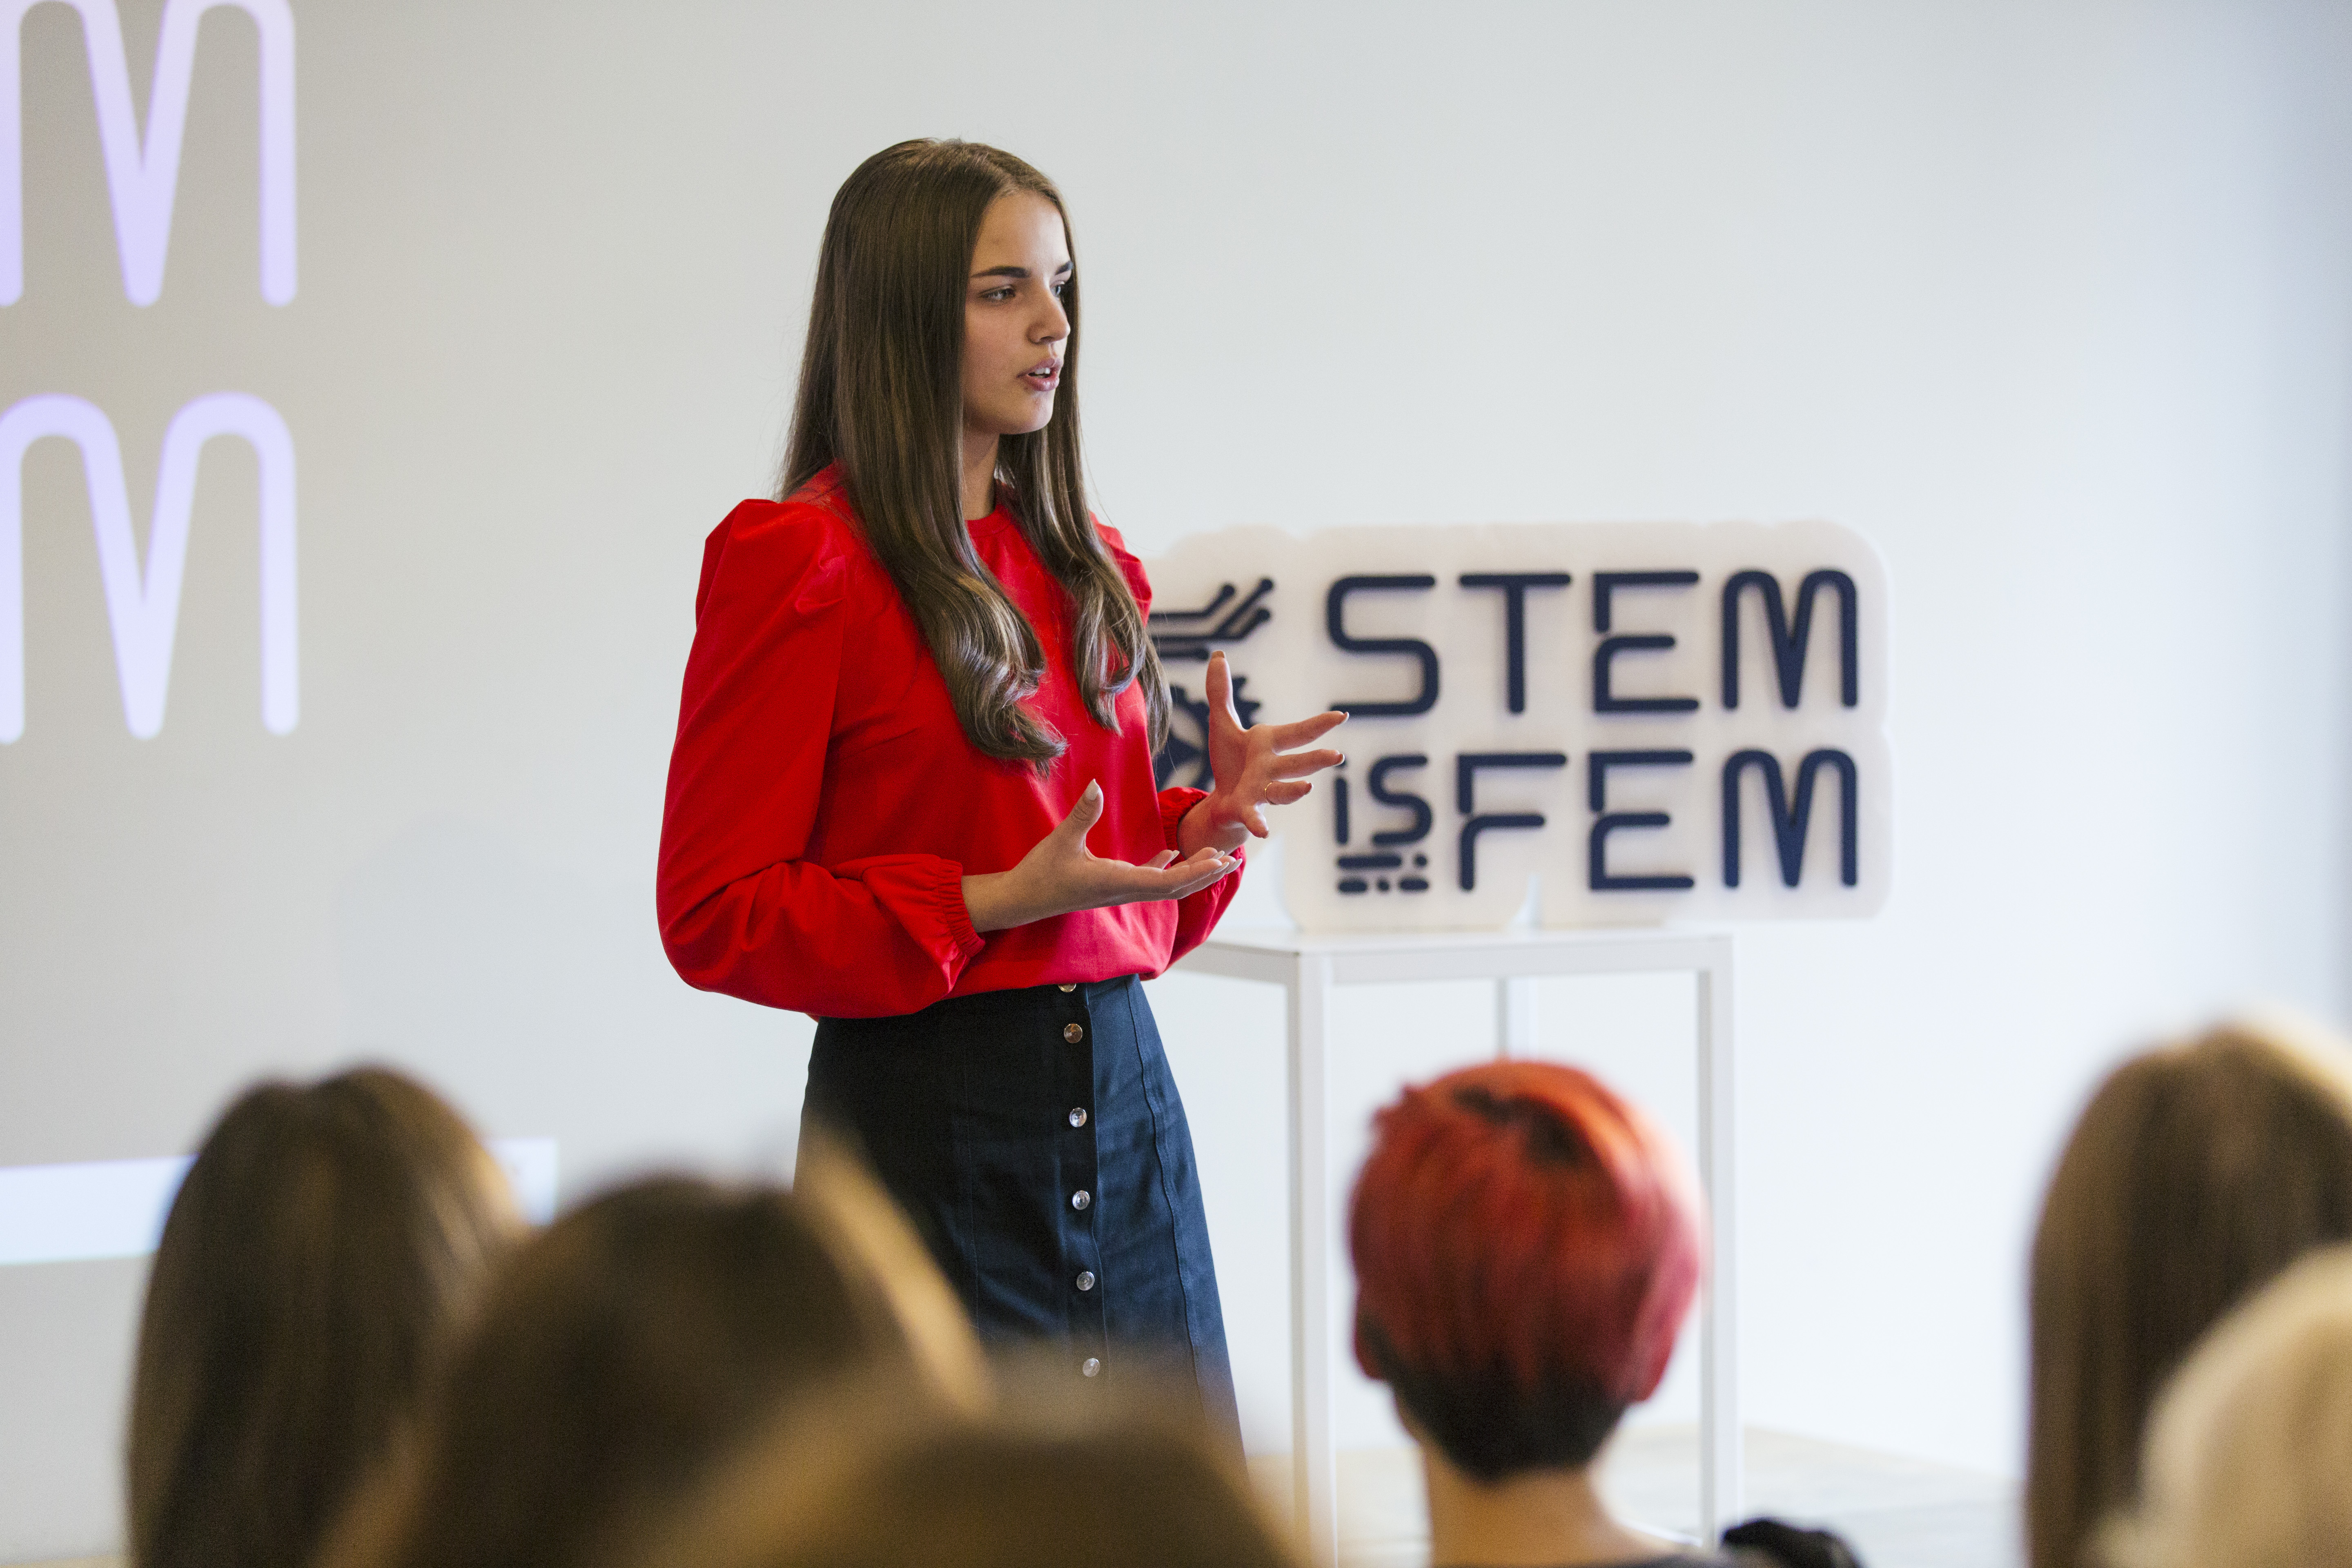 The First Educational Module of STEM is FEM!